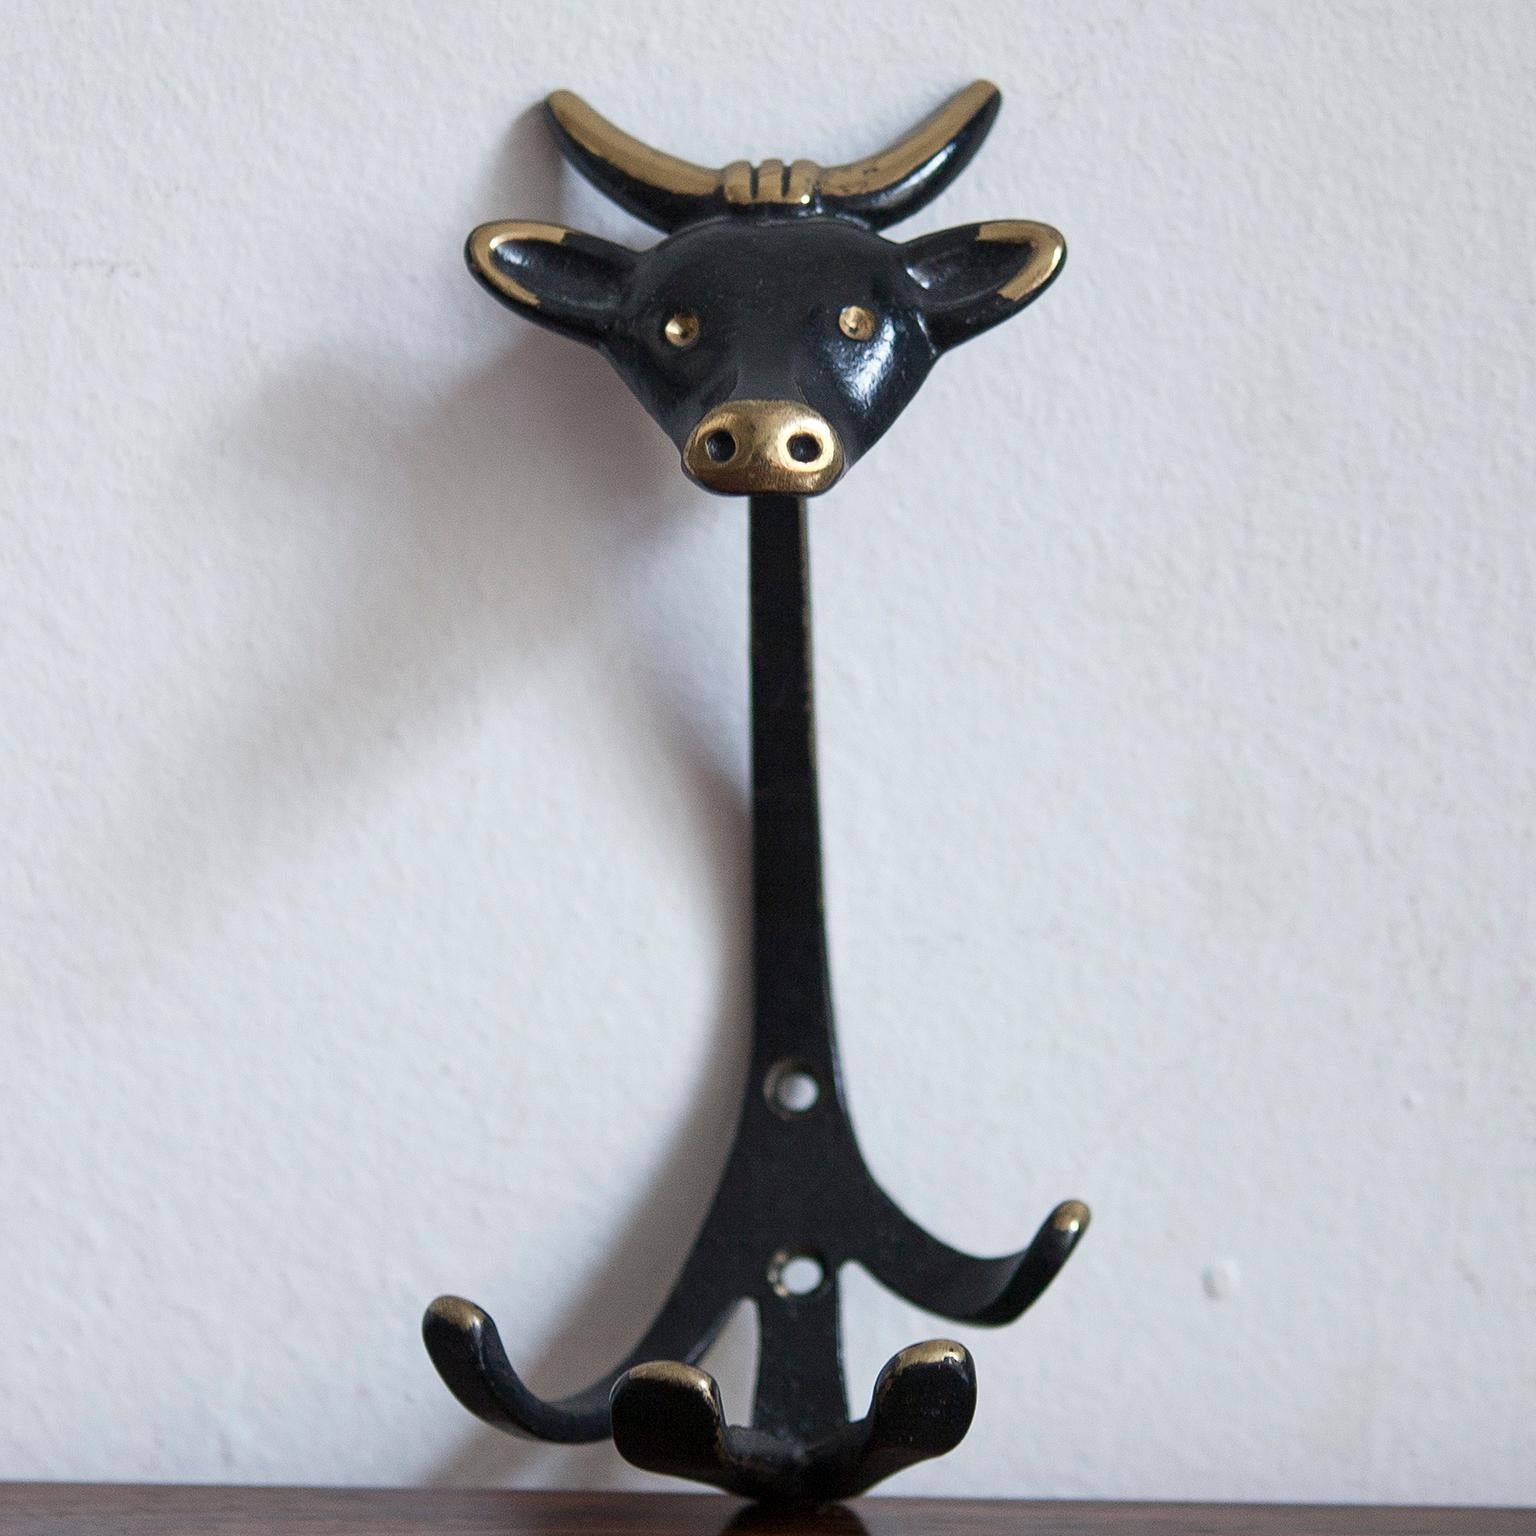 A set of 6 Austrian modernist brass wall coat hooks, displaying a cow, a monkey, a dog, a cat, a donkey and a gnome. A very humorous design by Walter Bosse, executed by Hertha Baller Austria in the 1950s. Made of black finished brass. In very good